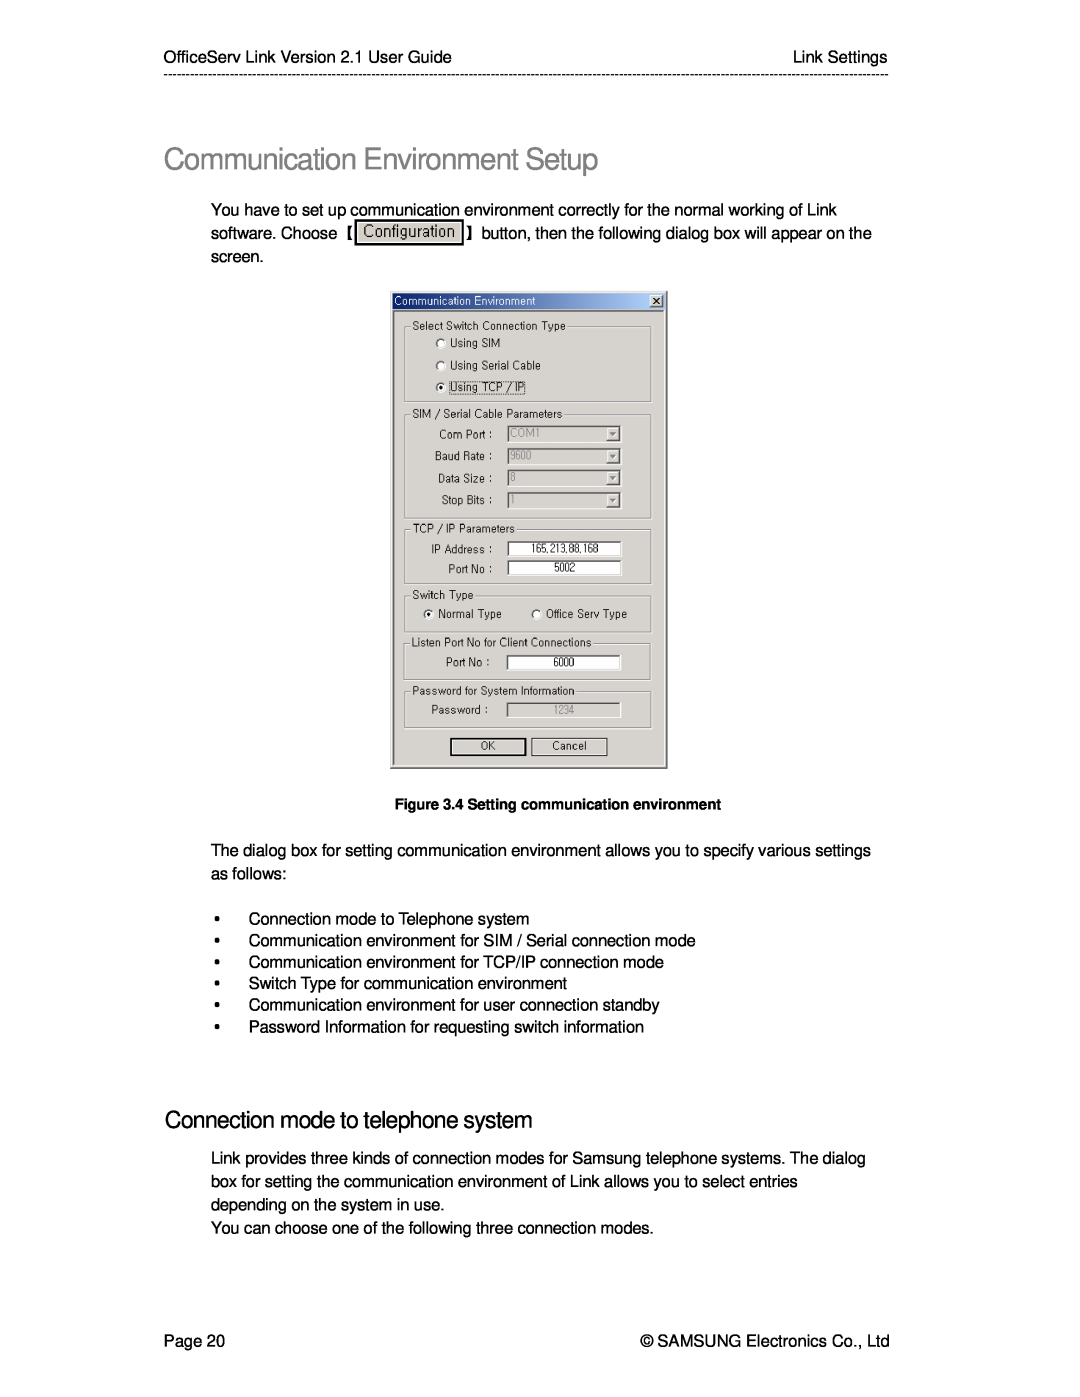 Samsung Version 2.1 manual Communication Environment Setup, Connection mode to telephone system 